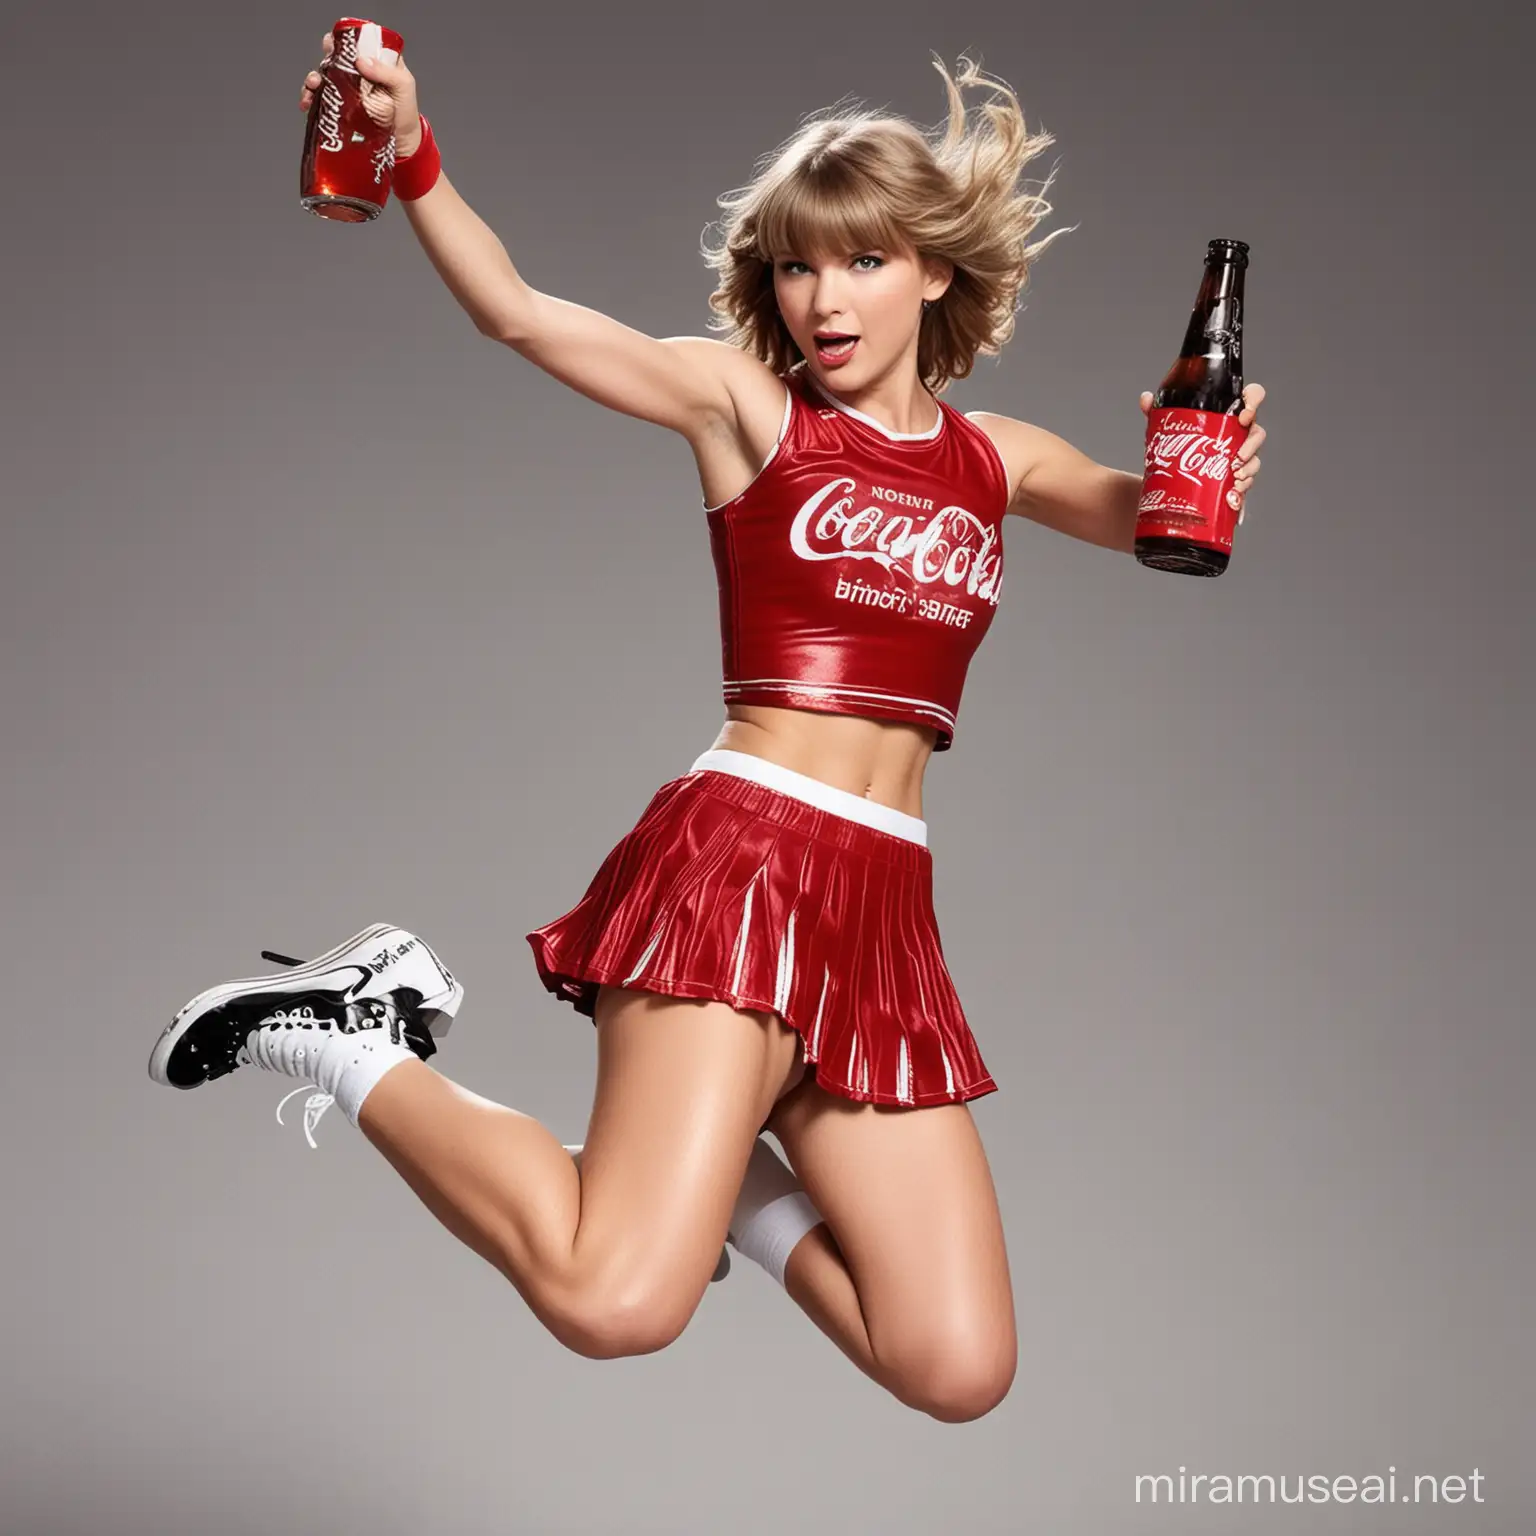 Cheerleader Taylor swift jumping in the air and drinking a coke